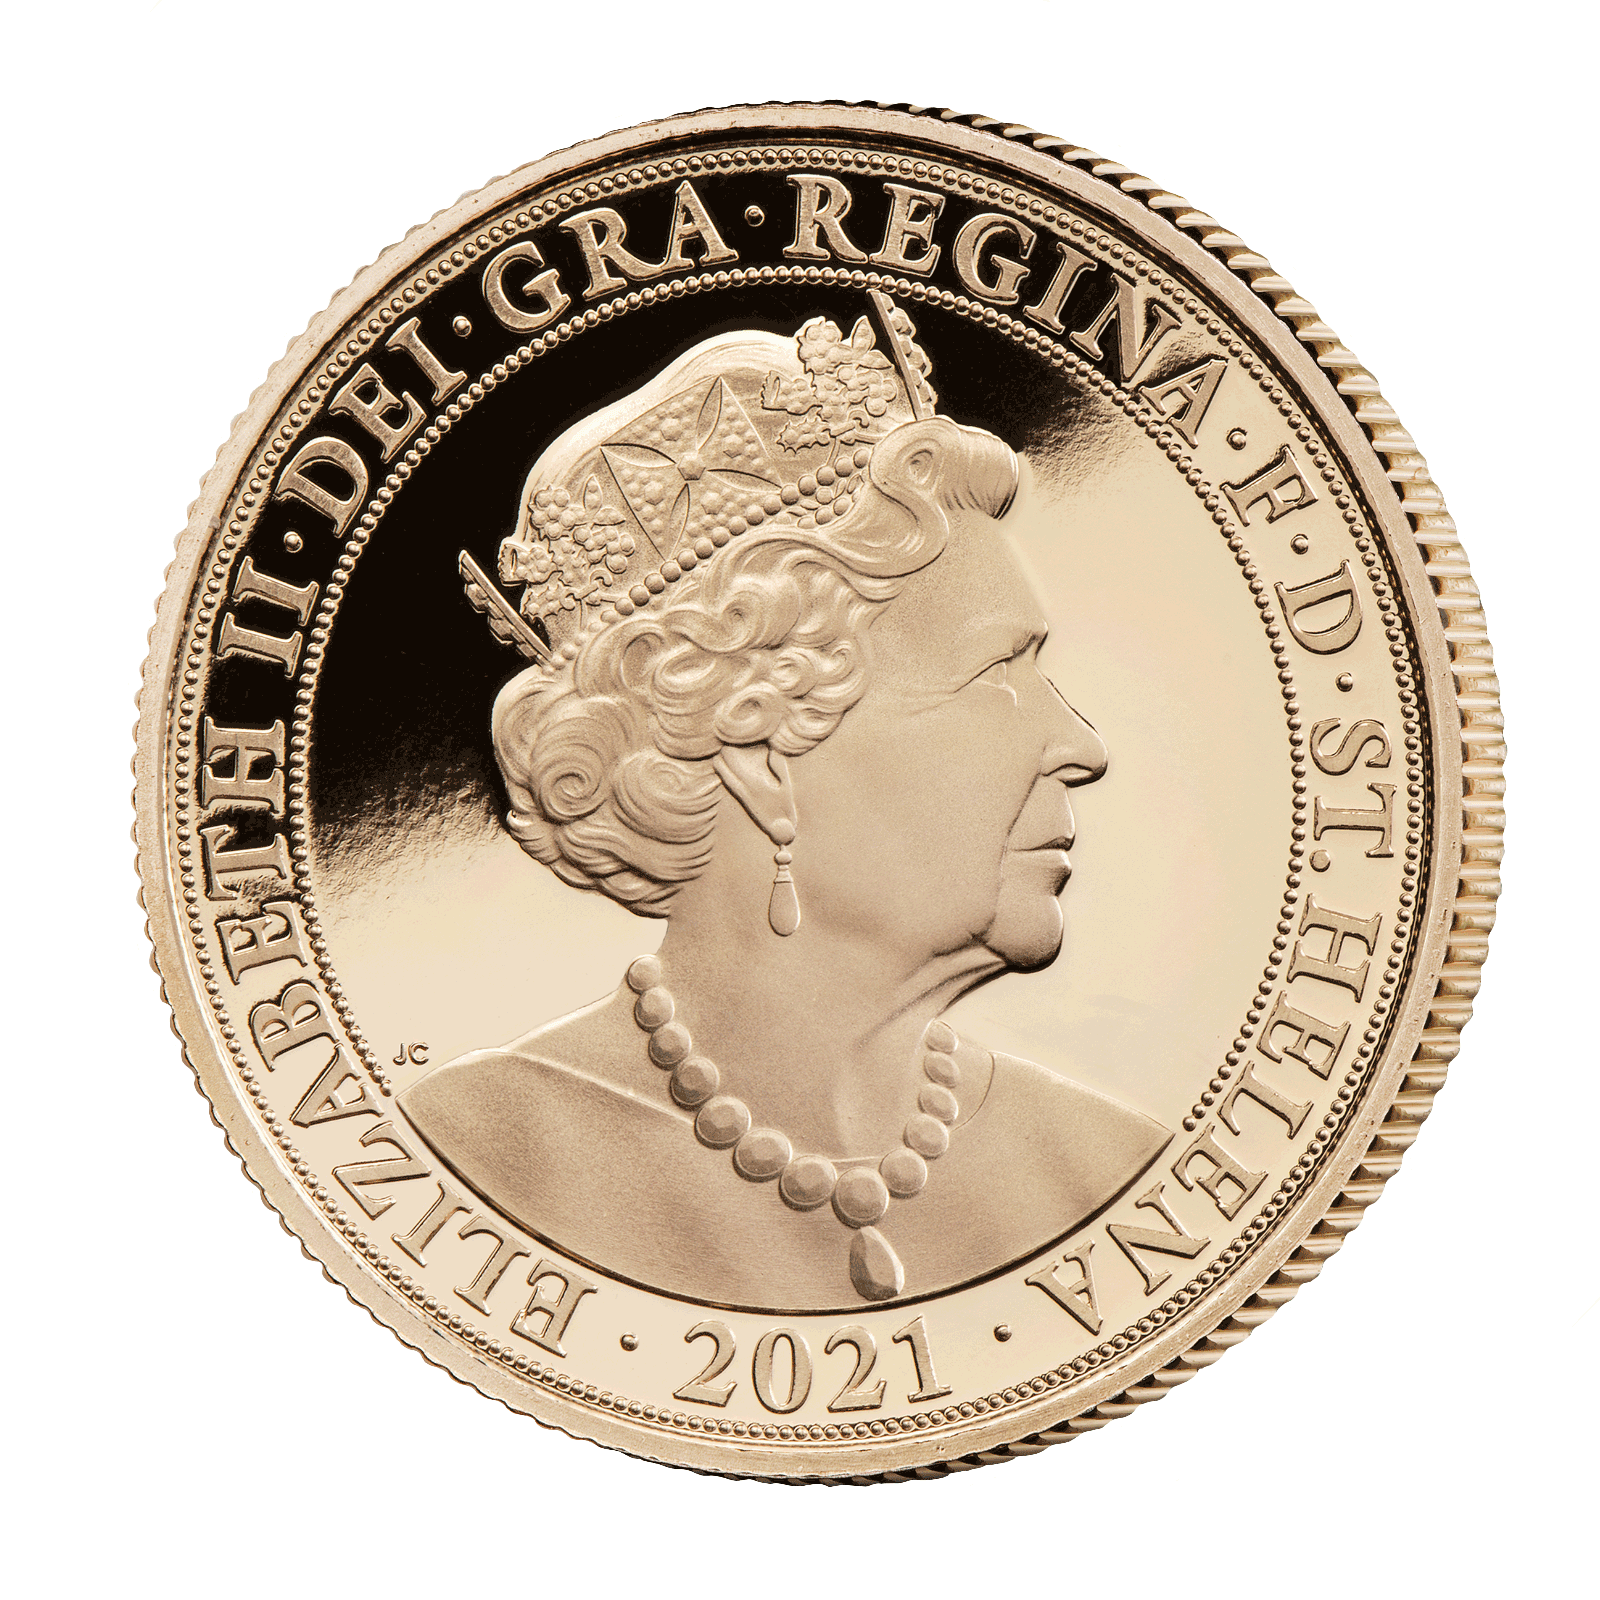 2021 Double Sovereign Gold Proof Coin